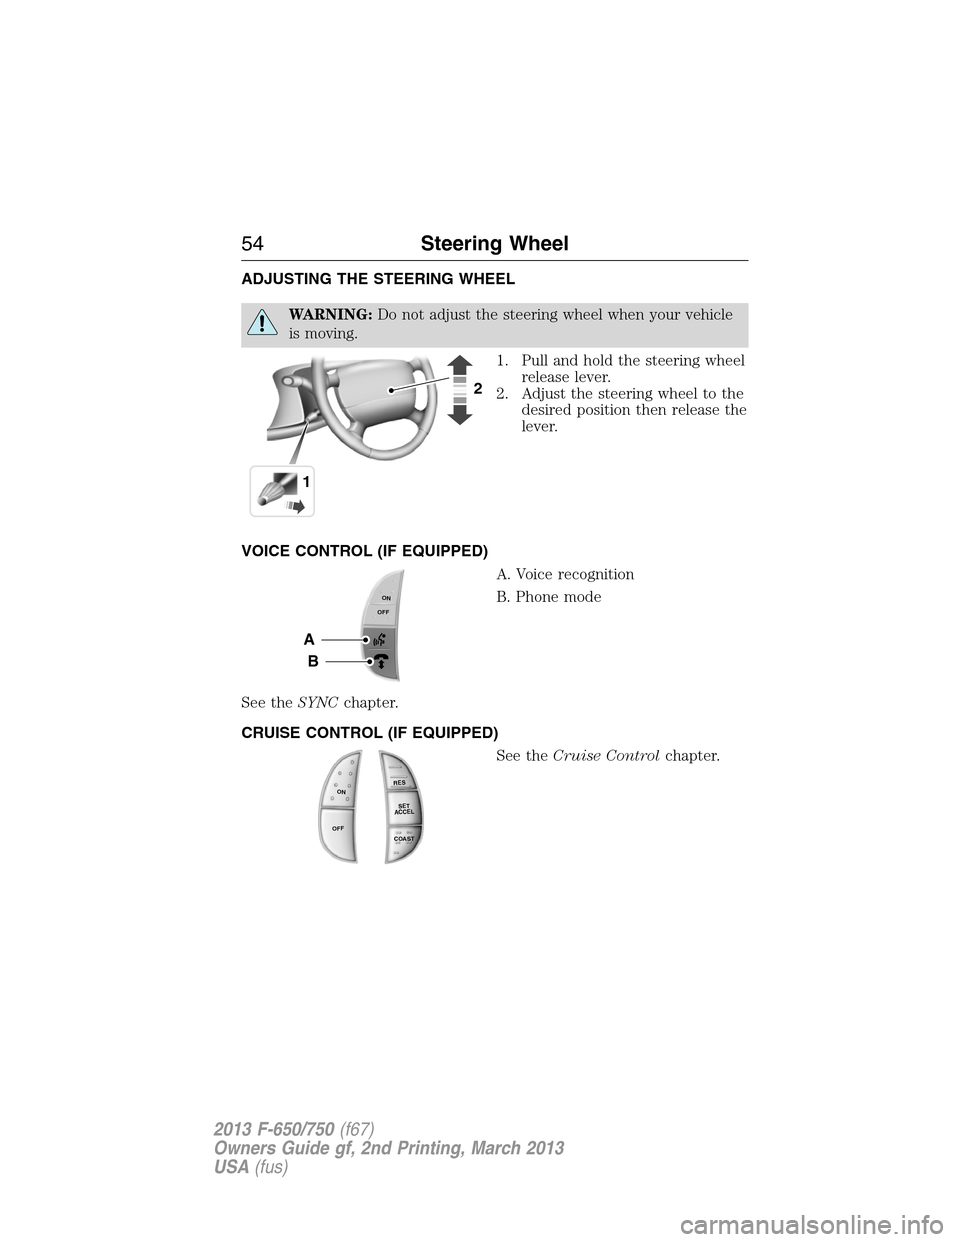 FORD F650 2013 12.G Owners Manual ADJUSTING THE STEERING WHEEL
WARNING:Do not adjust the steering wheel when your vehicle
is moving.
1. Pull and hold the steering wheel
release lever.
2. Adjust the steering wheel to the
desired positi